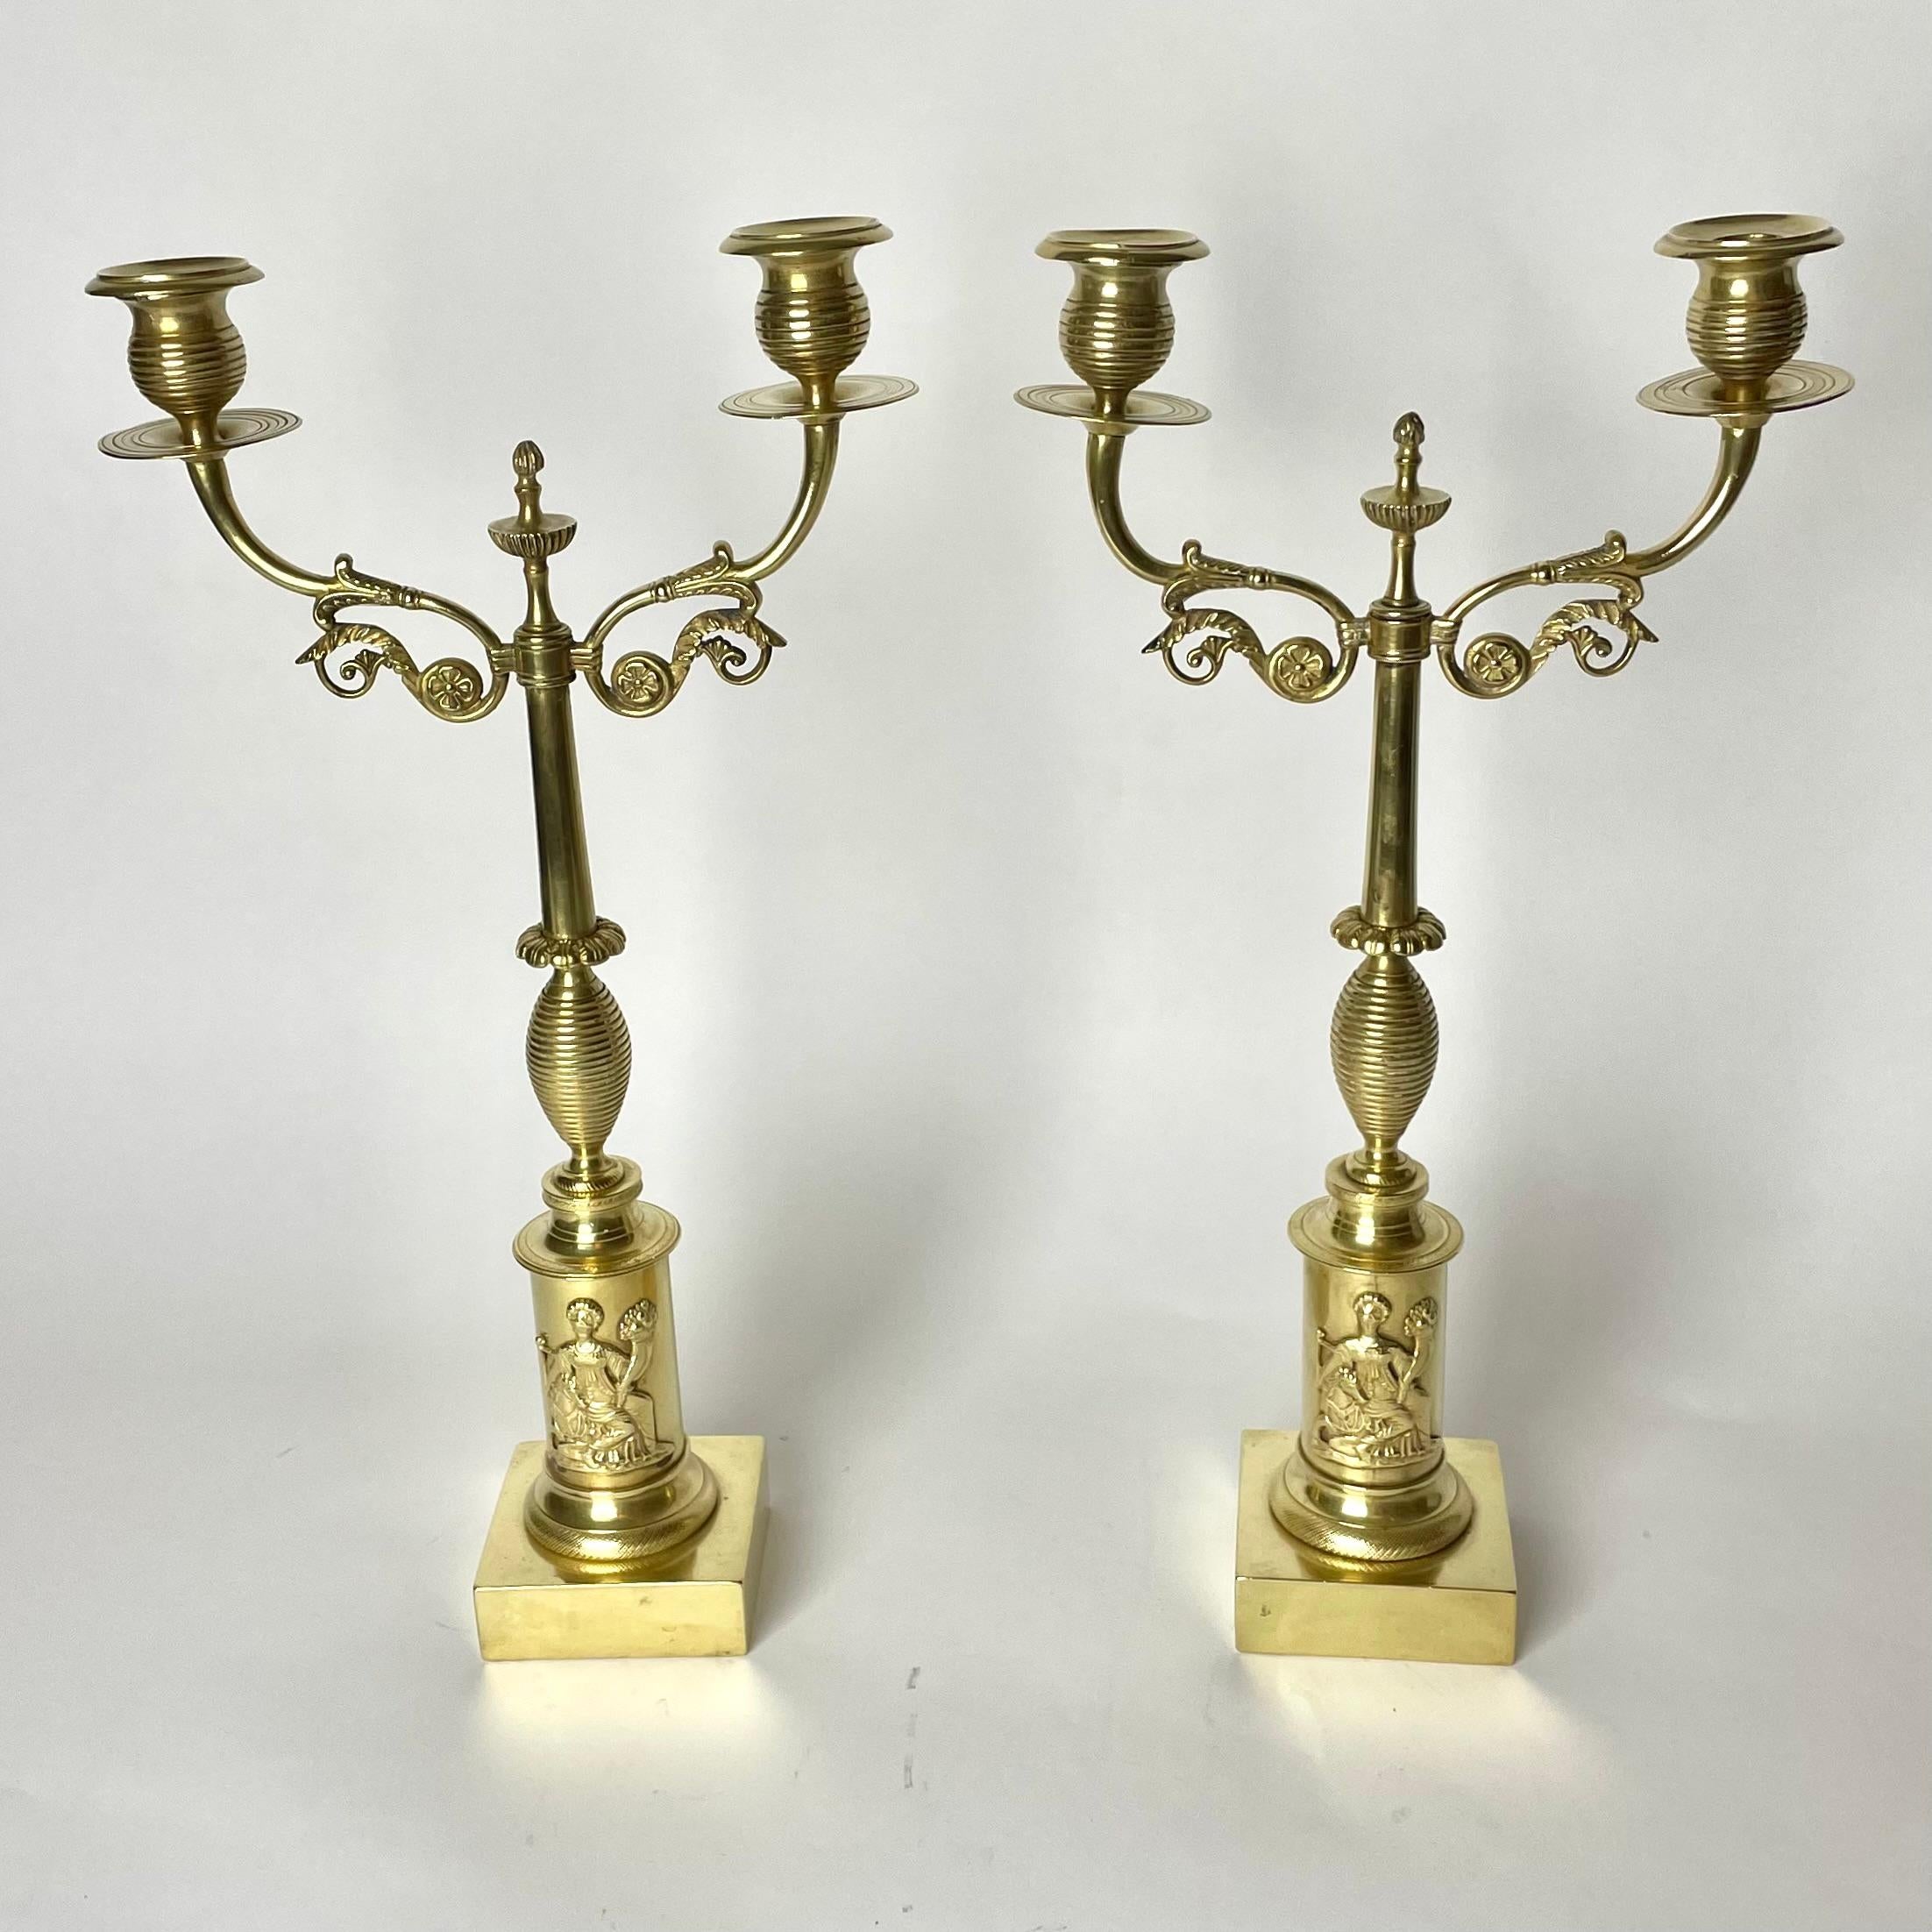 A beautiful pair of  Candelabras in brass. Made in Sweden during the 1820s.  Period design and decorations for Karl Johan, the Swedish Empire. 

Some height difference between the light arms due to age and use, but this does not affect the function